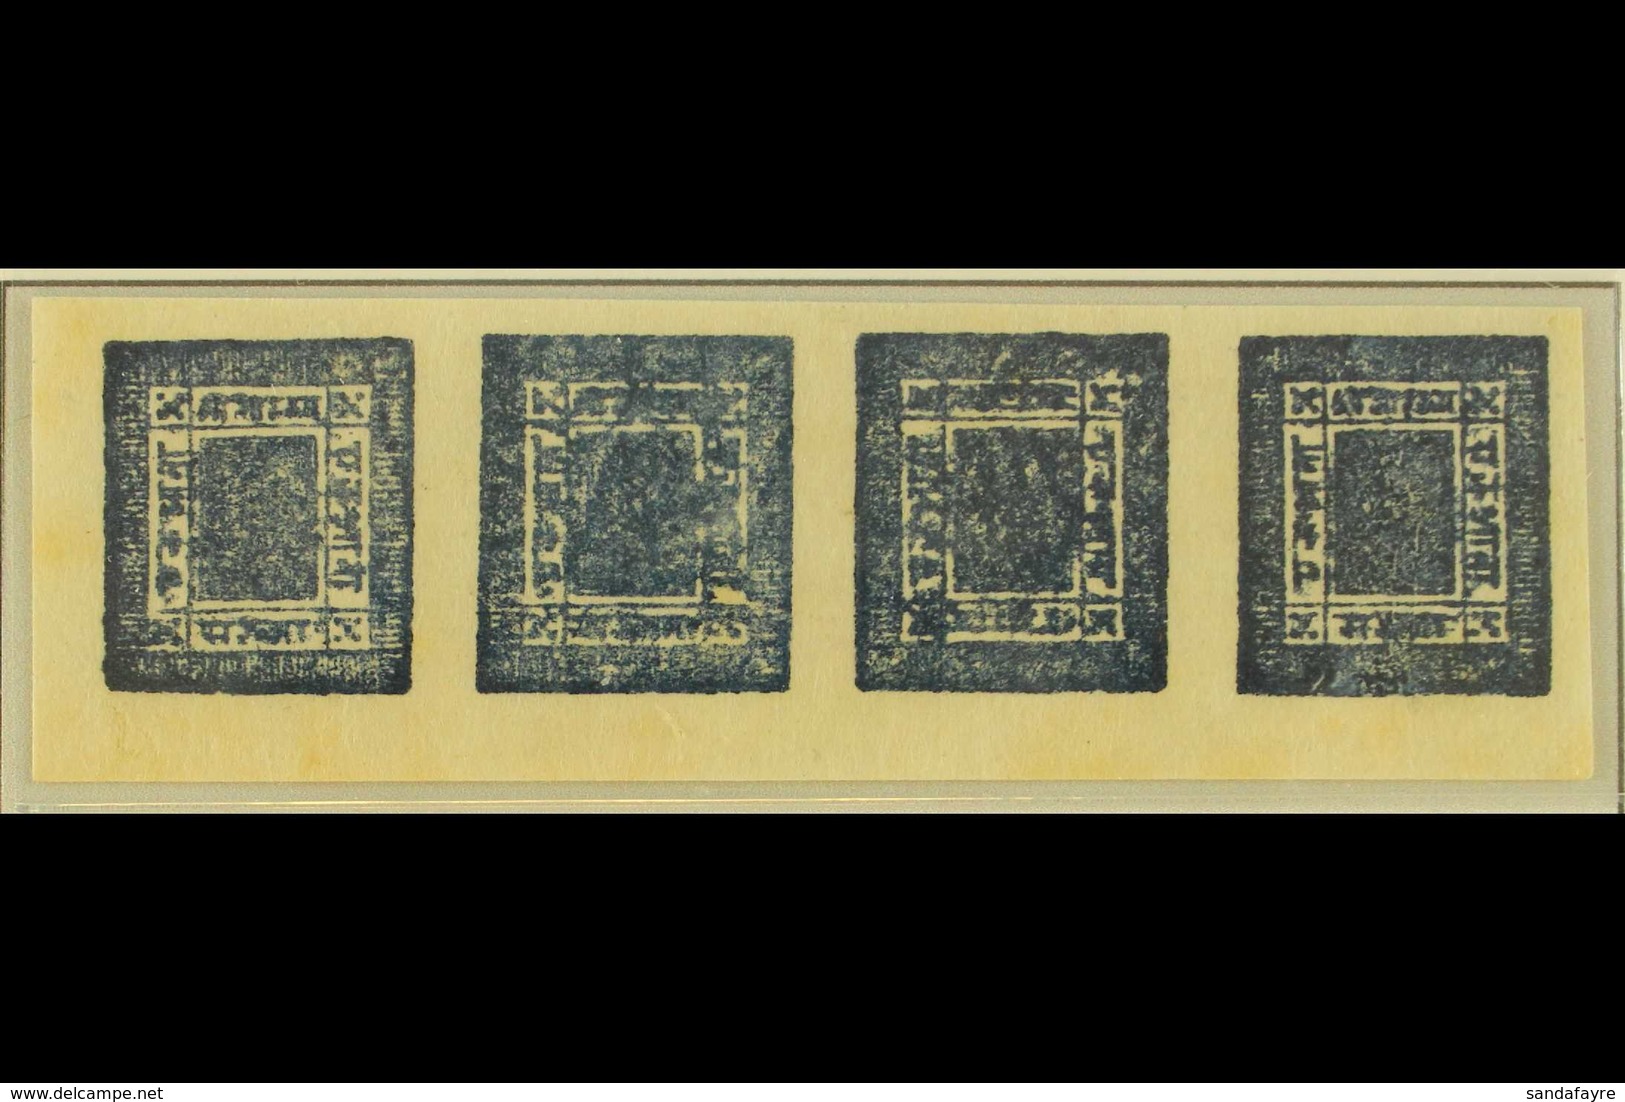 1886-9 1a Blue, Slightly Blurred Impressions, Horizontal Strip Of 4 With TETE-BECHE PAIR, Setting 8/9, Positions 57/60 ( - Nepal